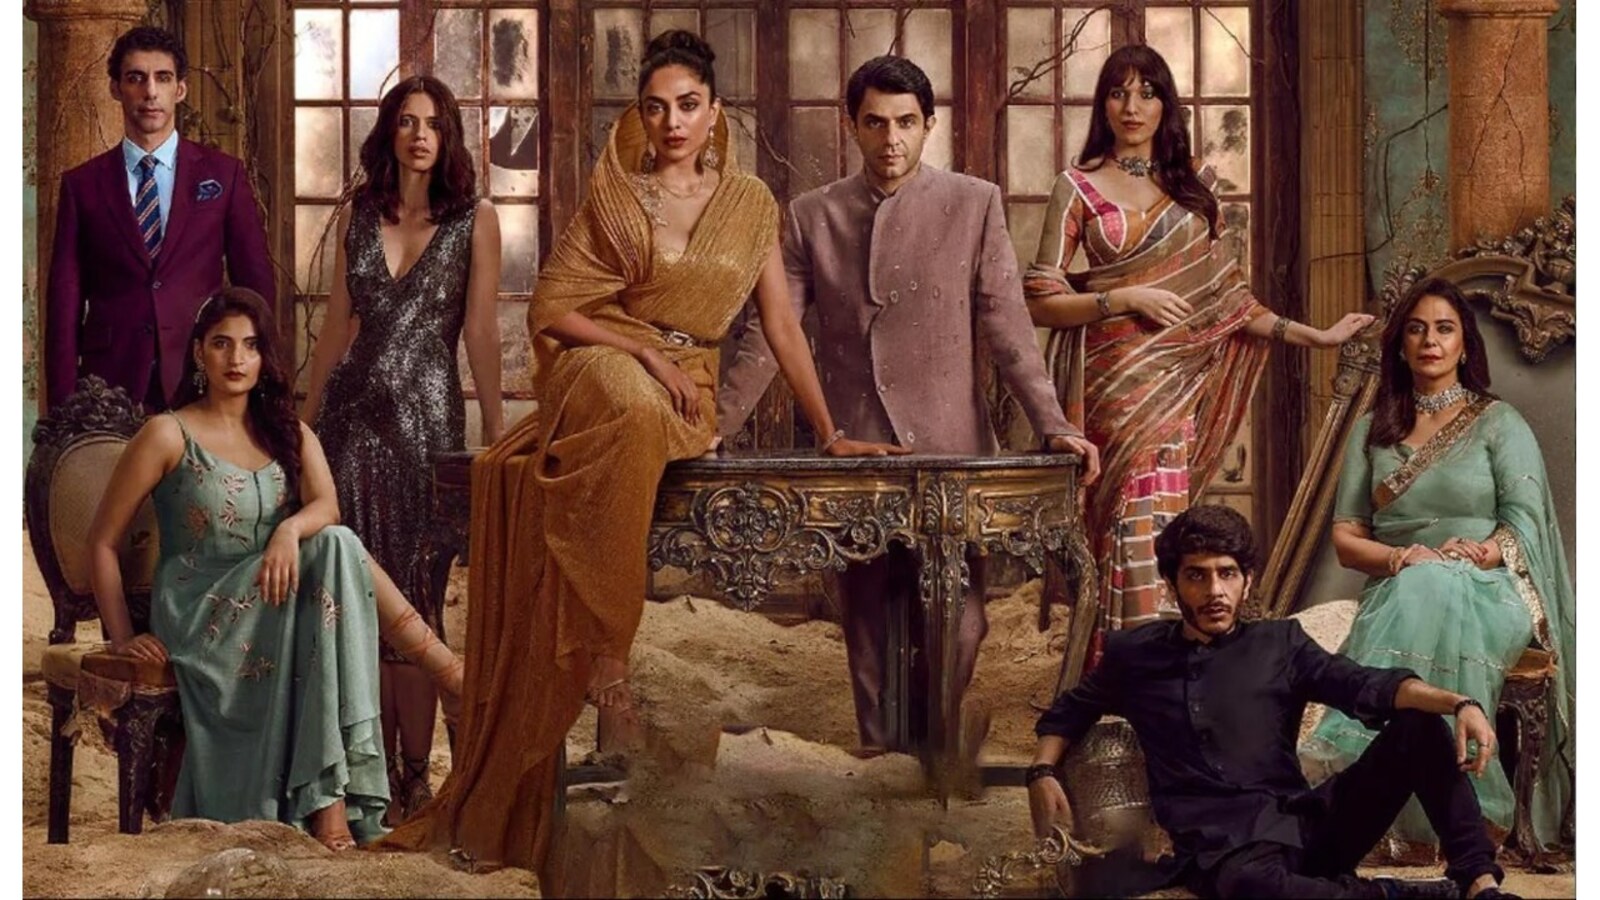 Sabyasachi - We are pleased to announce an exclusive association